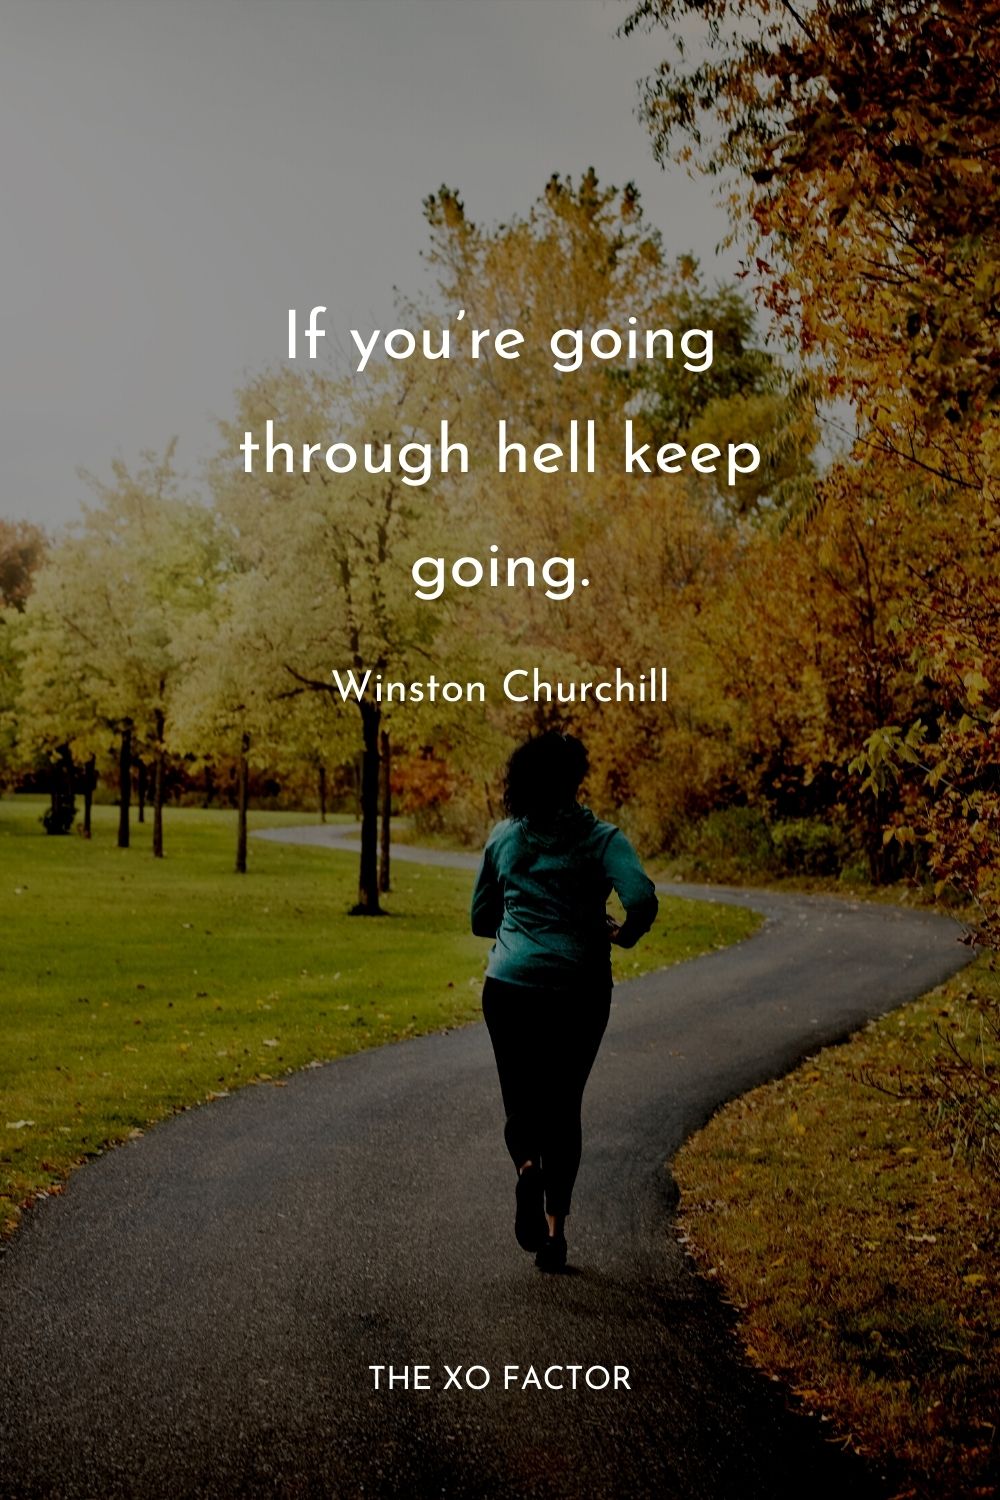 If you’re going through hell keep going.